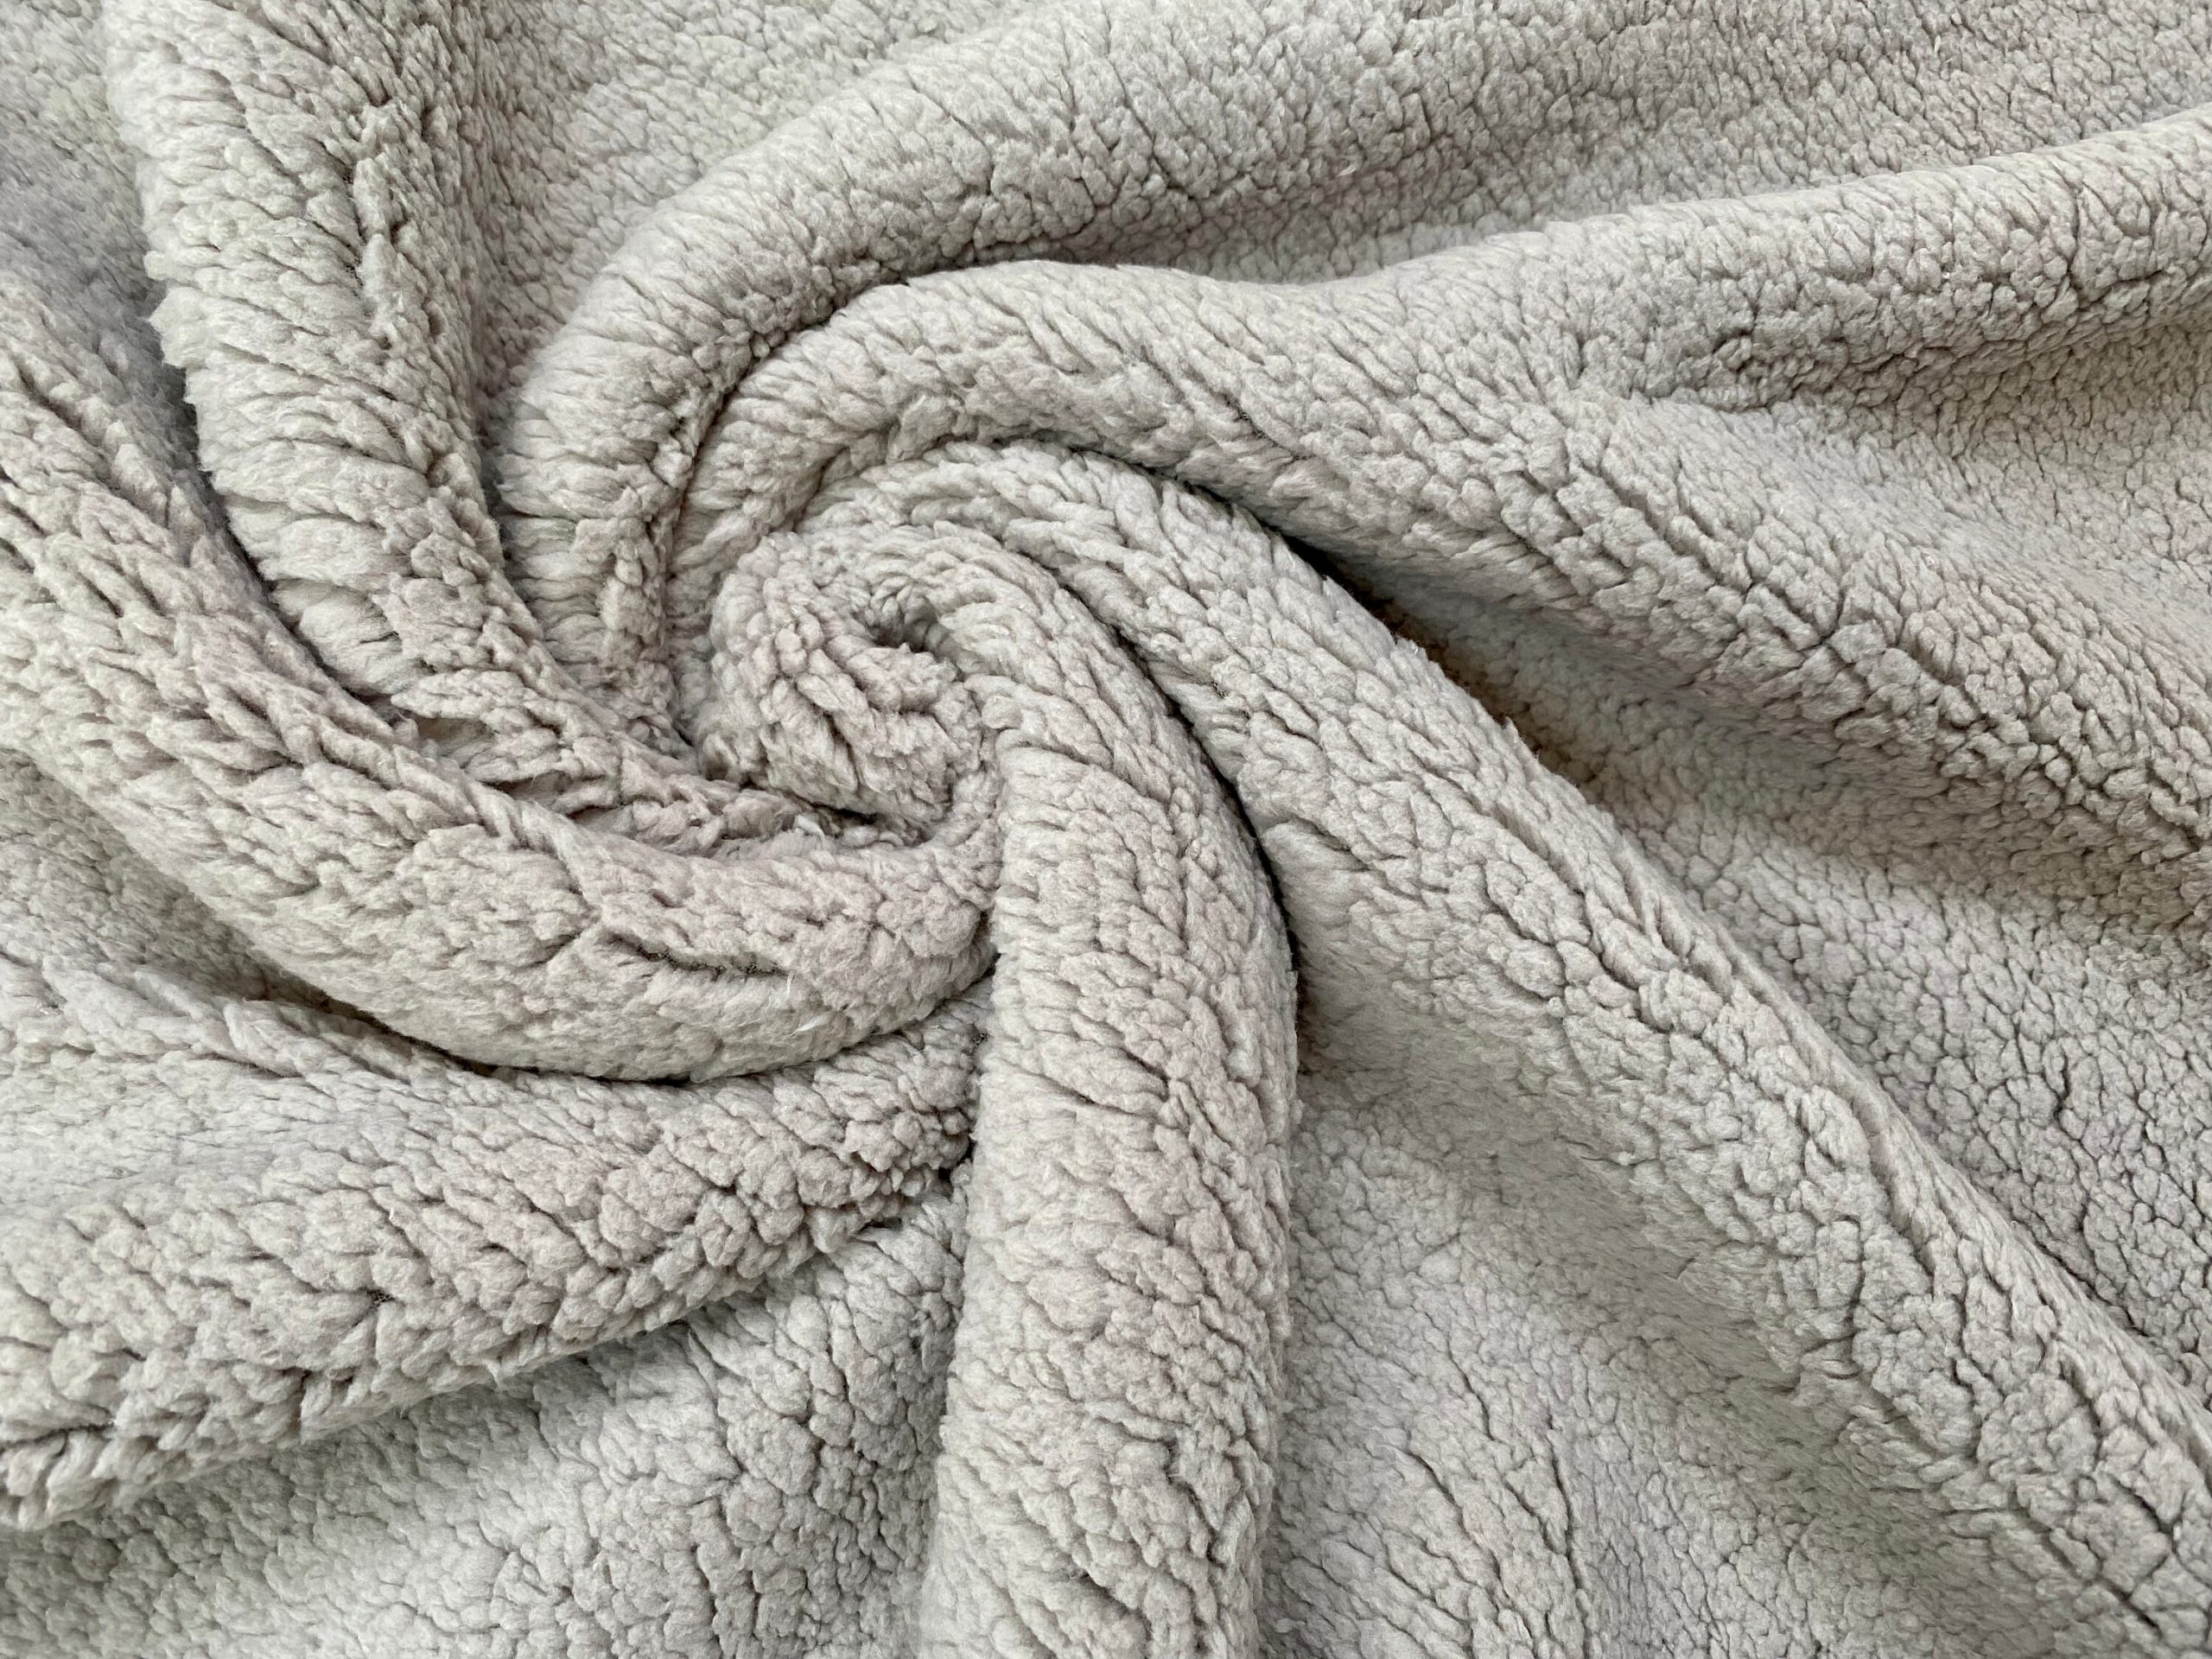 https://lushfabric.com/wp-content/uploads/2021/08/sherpa-fleece-fabric-super-soft-stretch-material-home-decor-upholstery-dressmaking-64-165-cm-wide-grey-610aa4a2-scaled.jpg